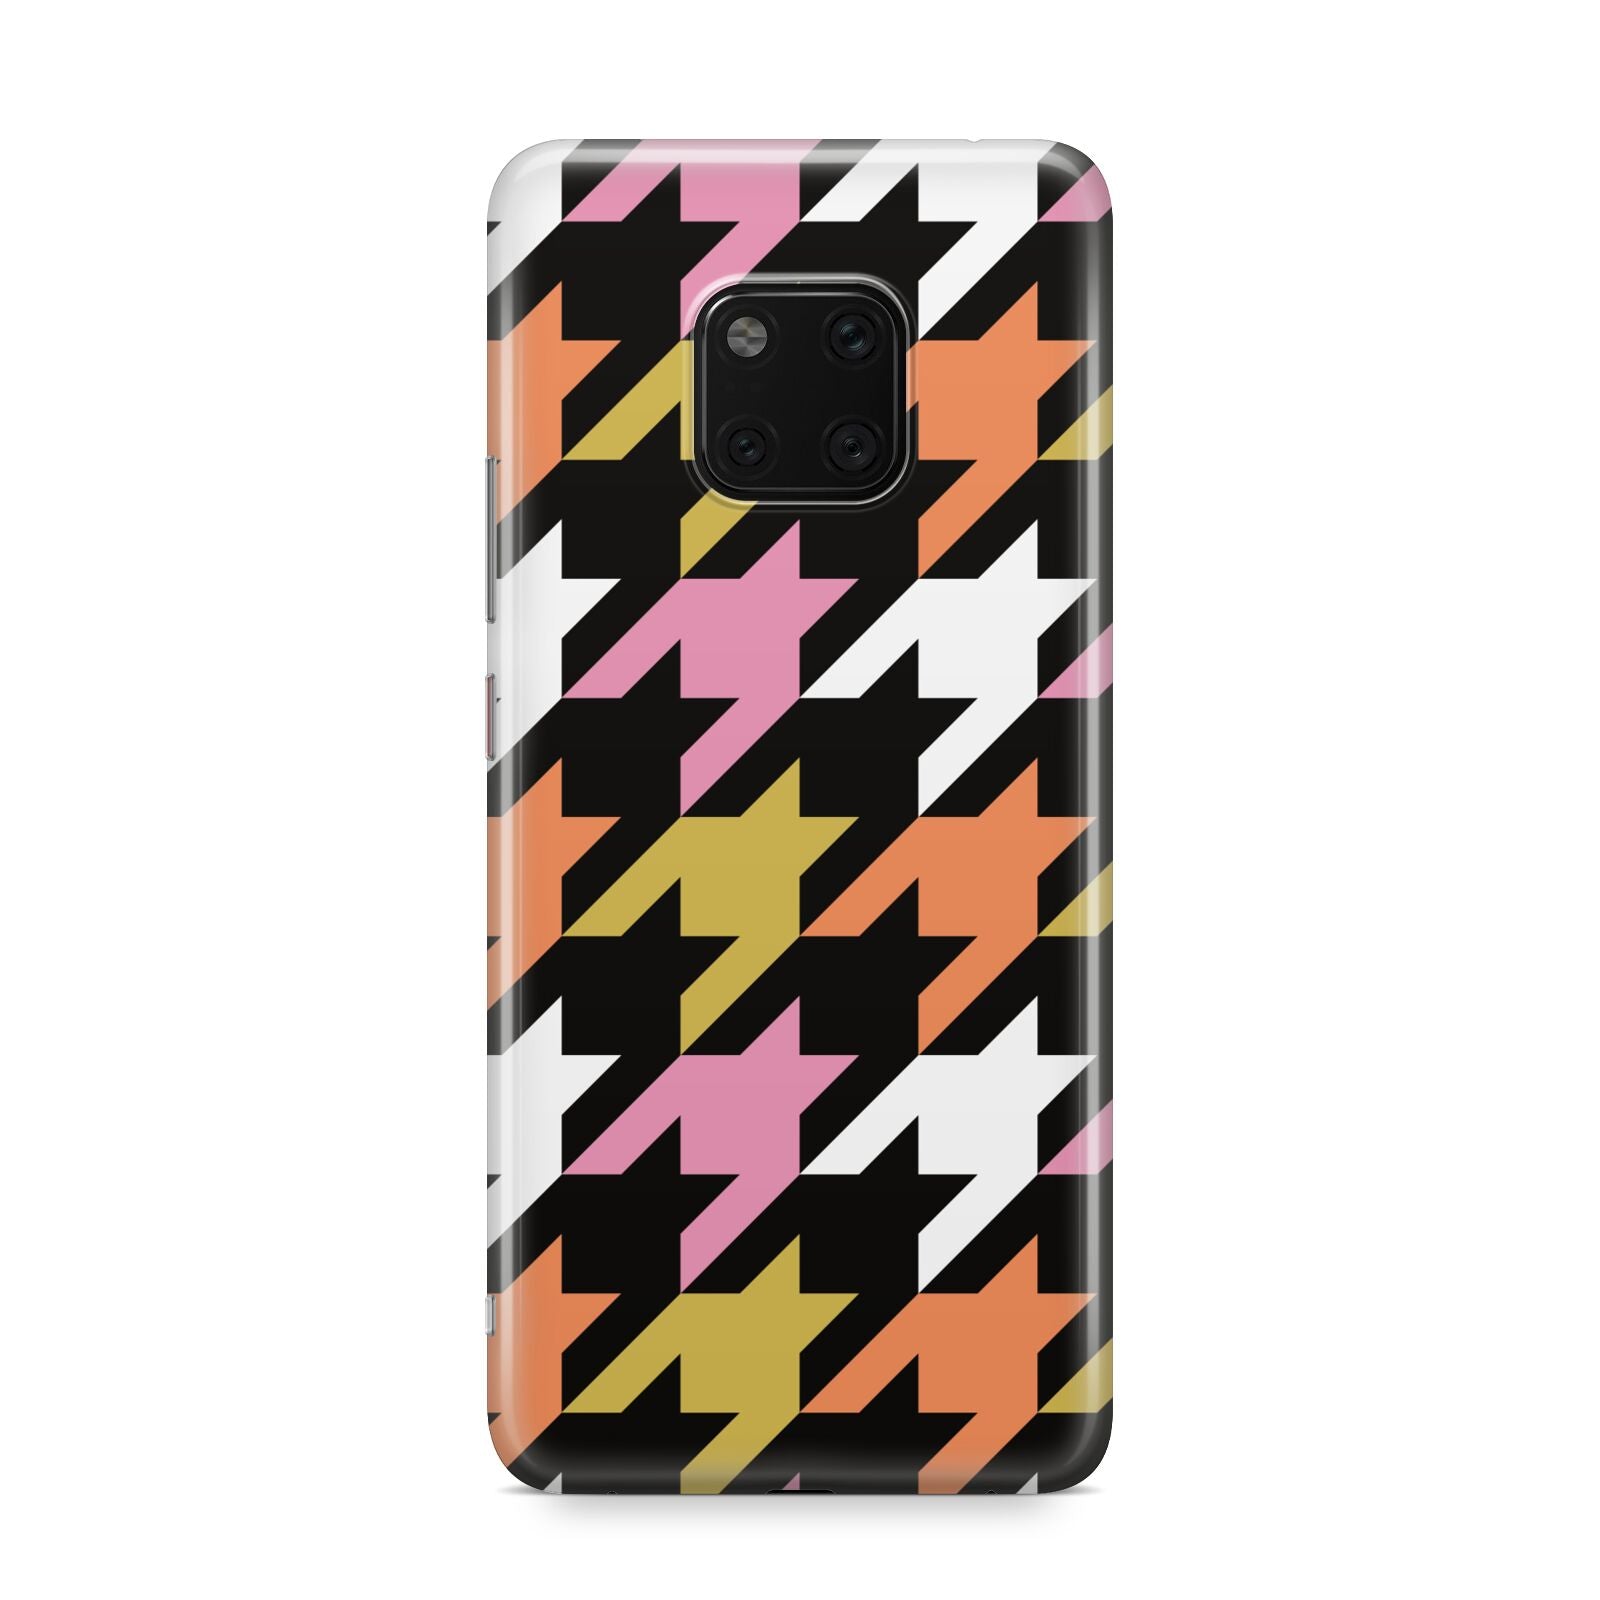 Retro Houndstooth Huawei Mate 20 Pro Phone Case